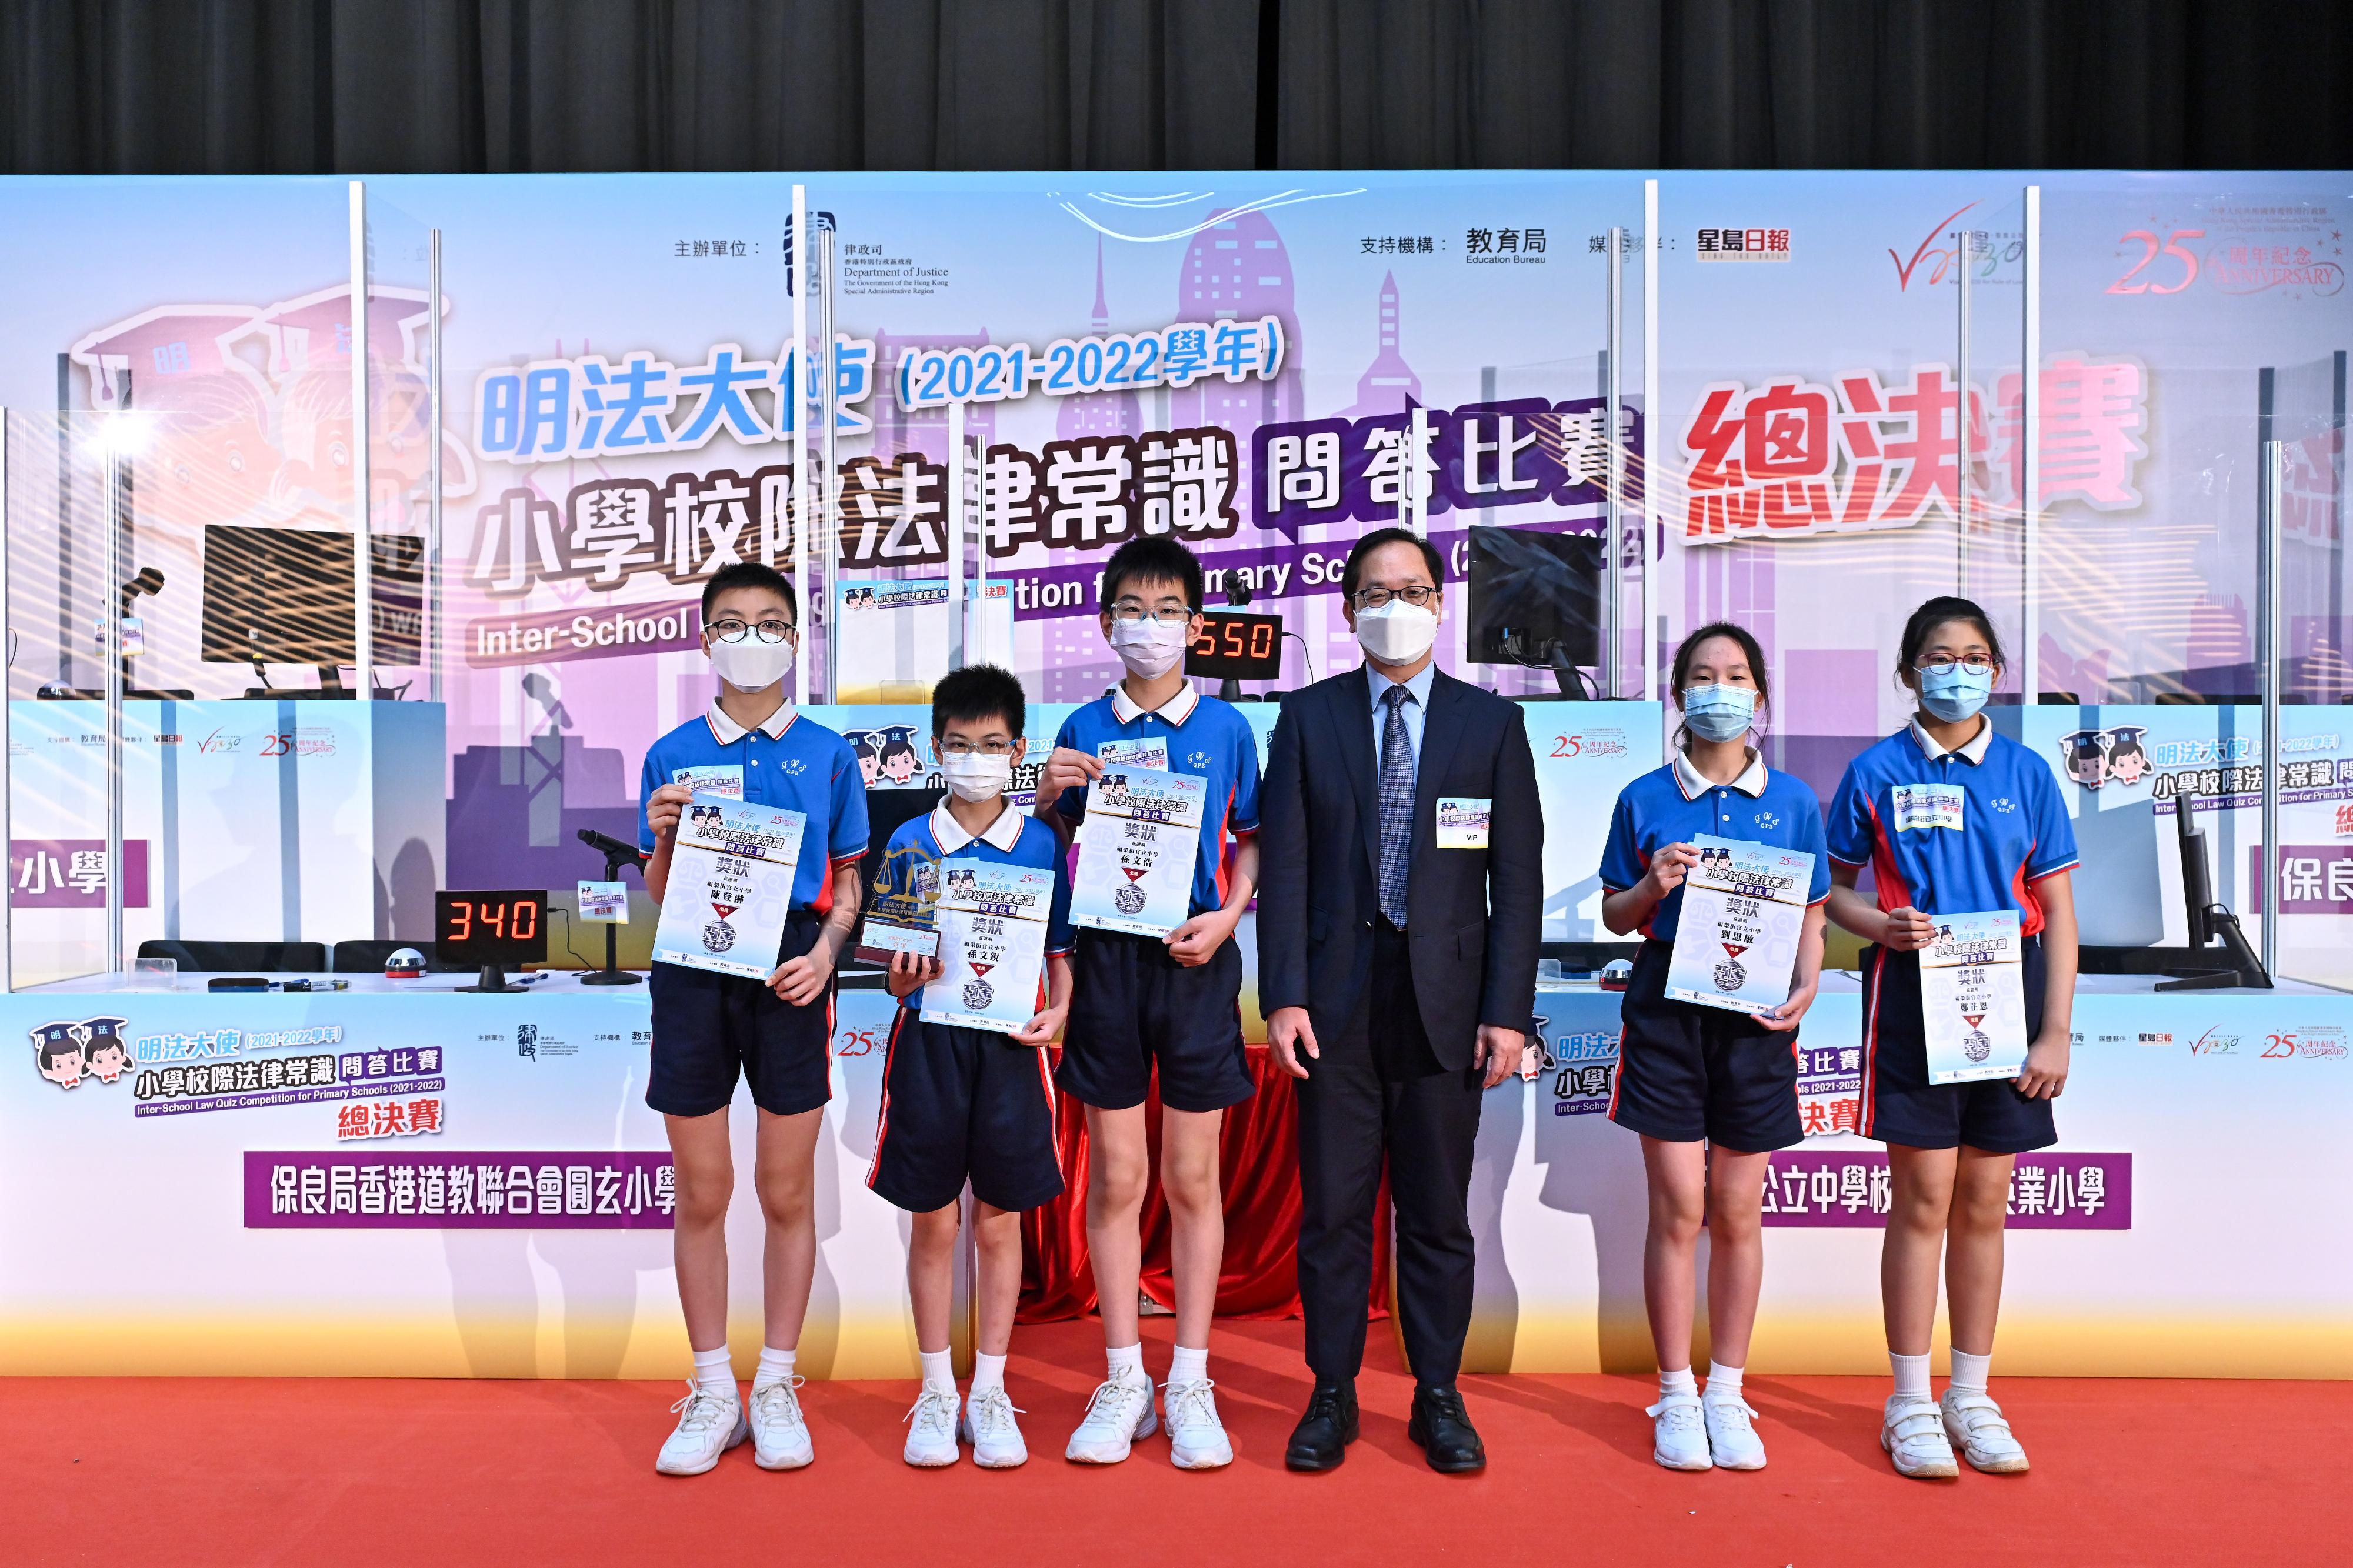 The Grand Final of the Inter-School Law Quiz Competition for primary school students, organised by the Department of Justice (DoJ) and supported by the Education Bureau, was successfully held today (June 27) at the M+ museum. Photo shows the Law Draftsman of the DoJ, Mr Michael Lam (third right), presenting the award to the first runner-up, Fuk Wing Street Government Primary School.